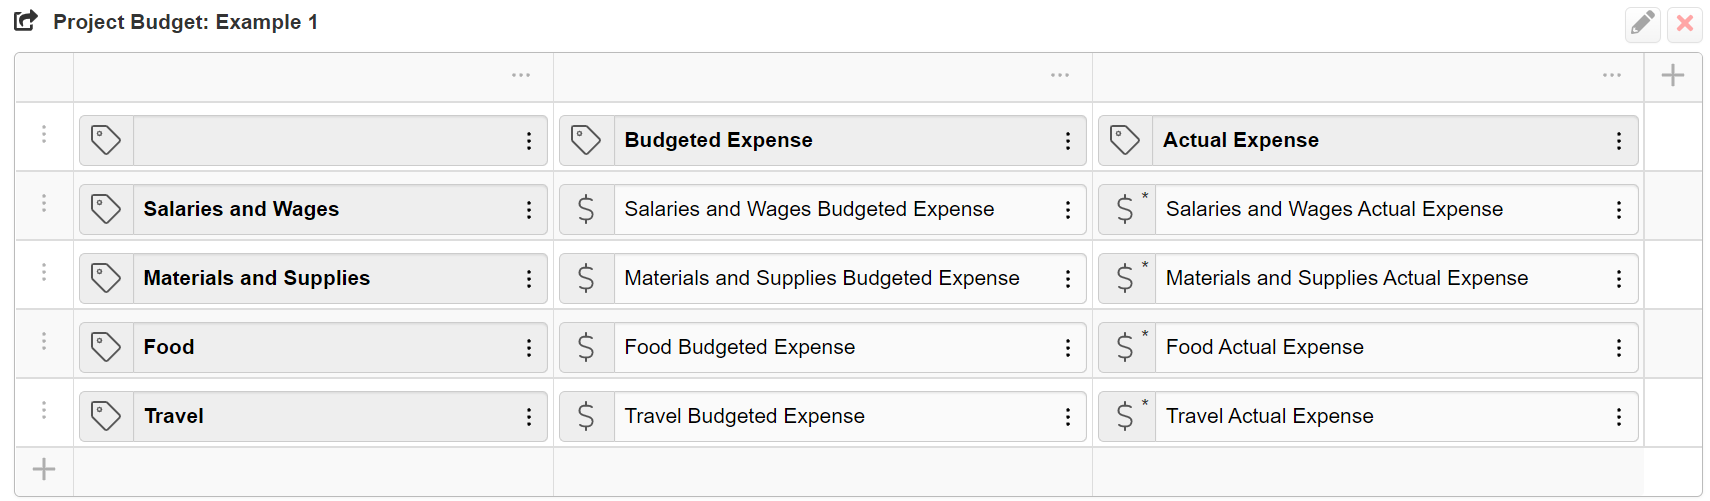 Image of a project budget table shared to a follow up form